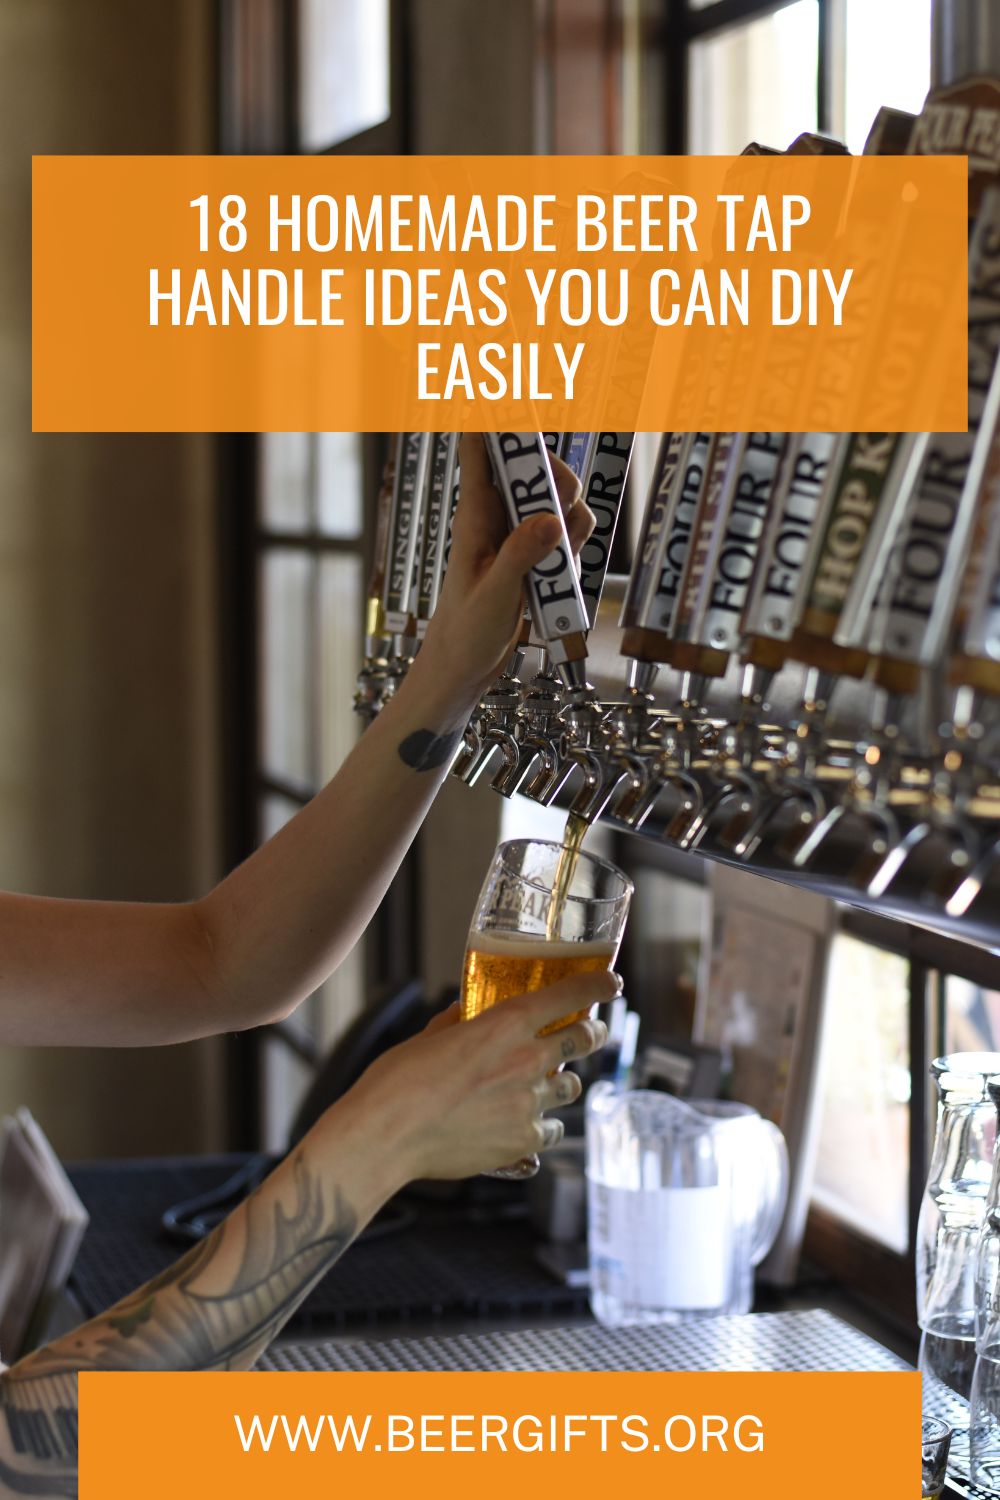 18 Homemade Beer Tap Handle ideas You Can DIY Easily11